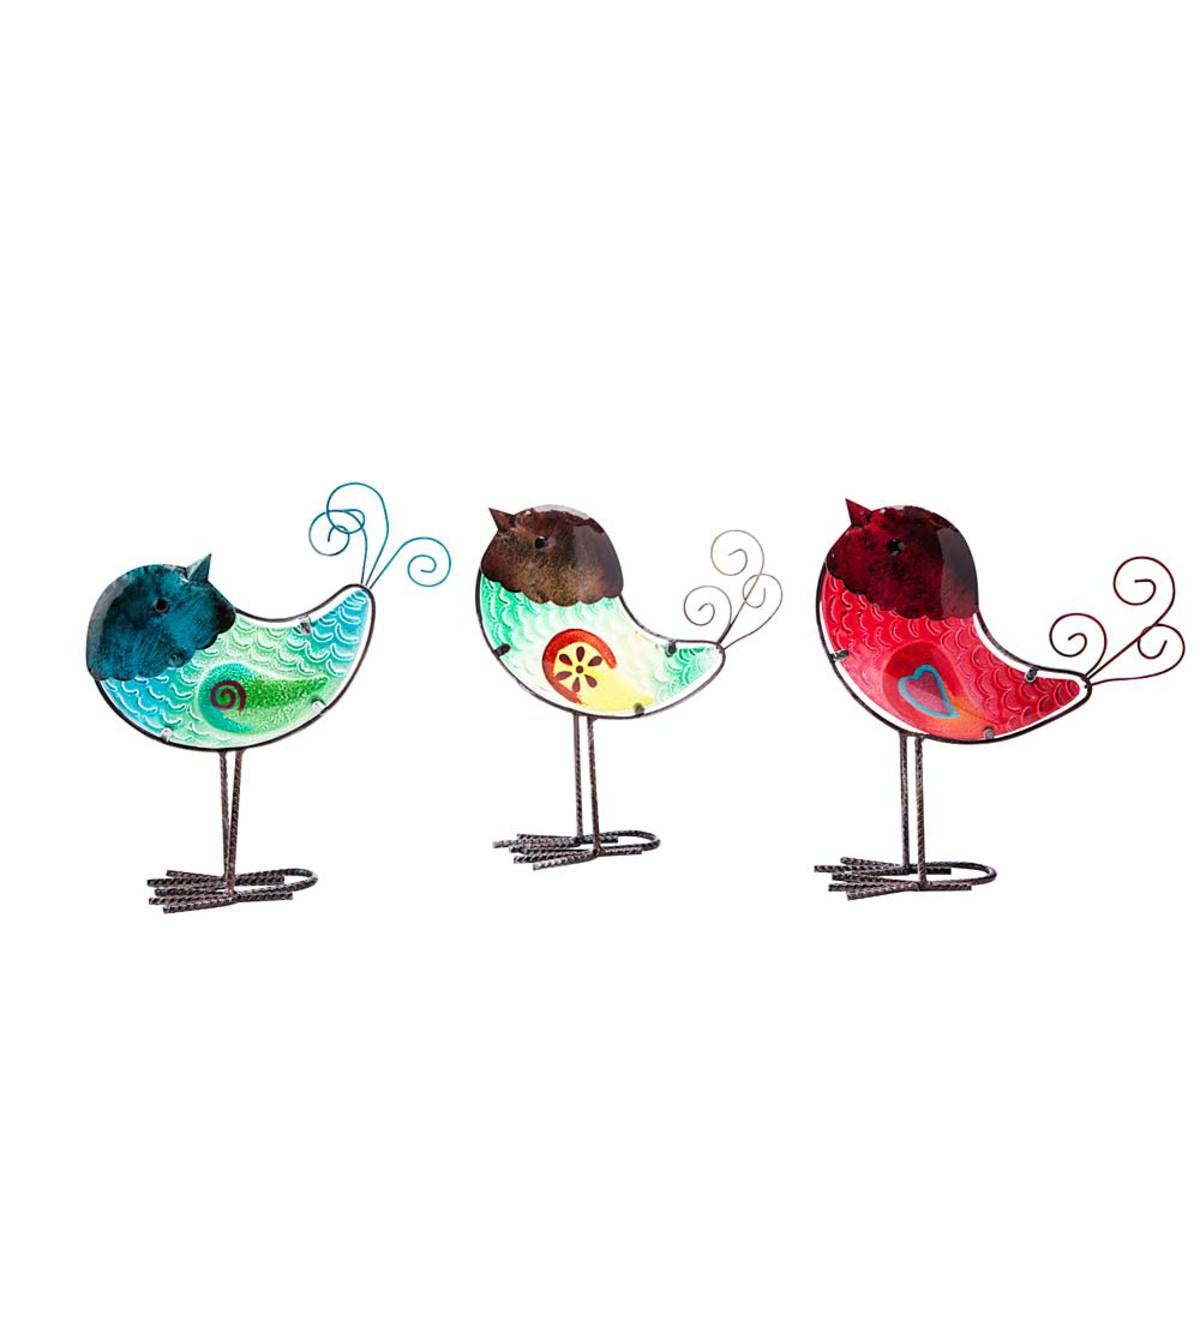 Colorful Glass Bird Garden Accents, Set of 3